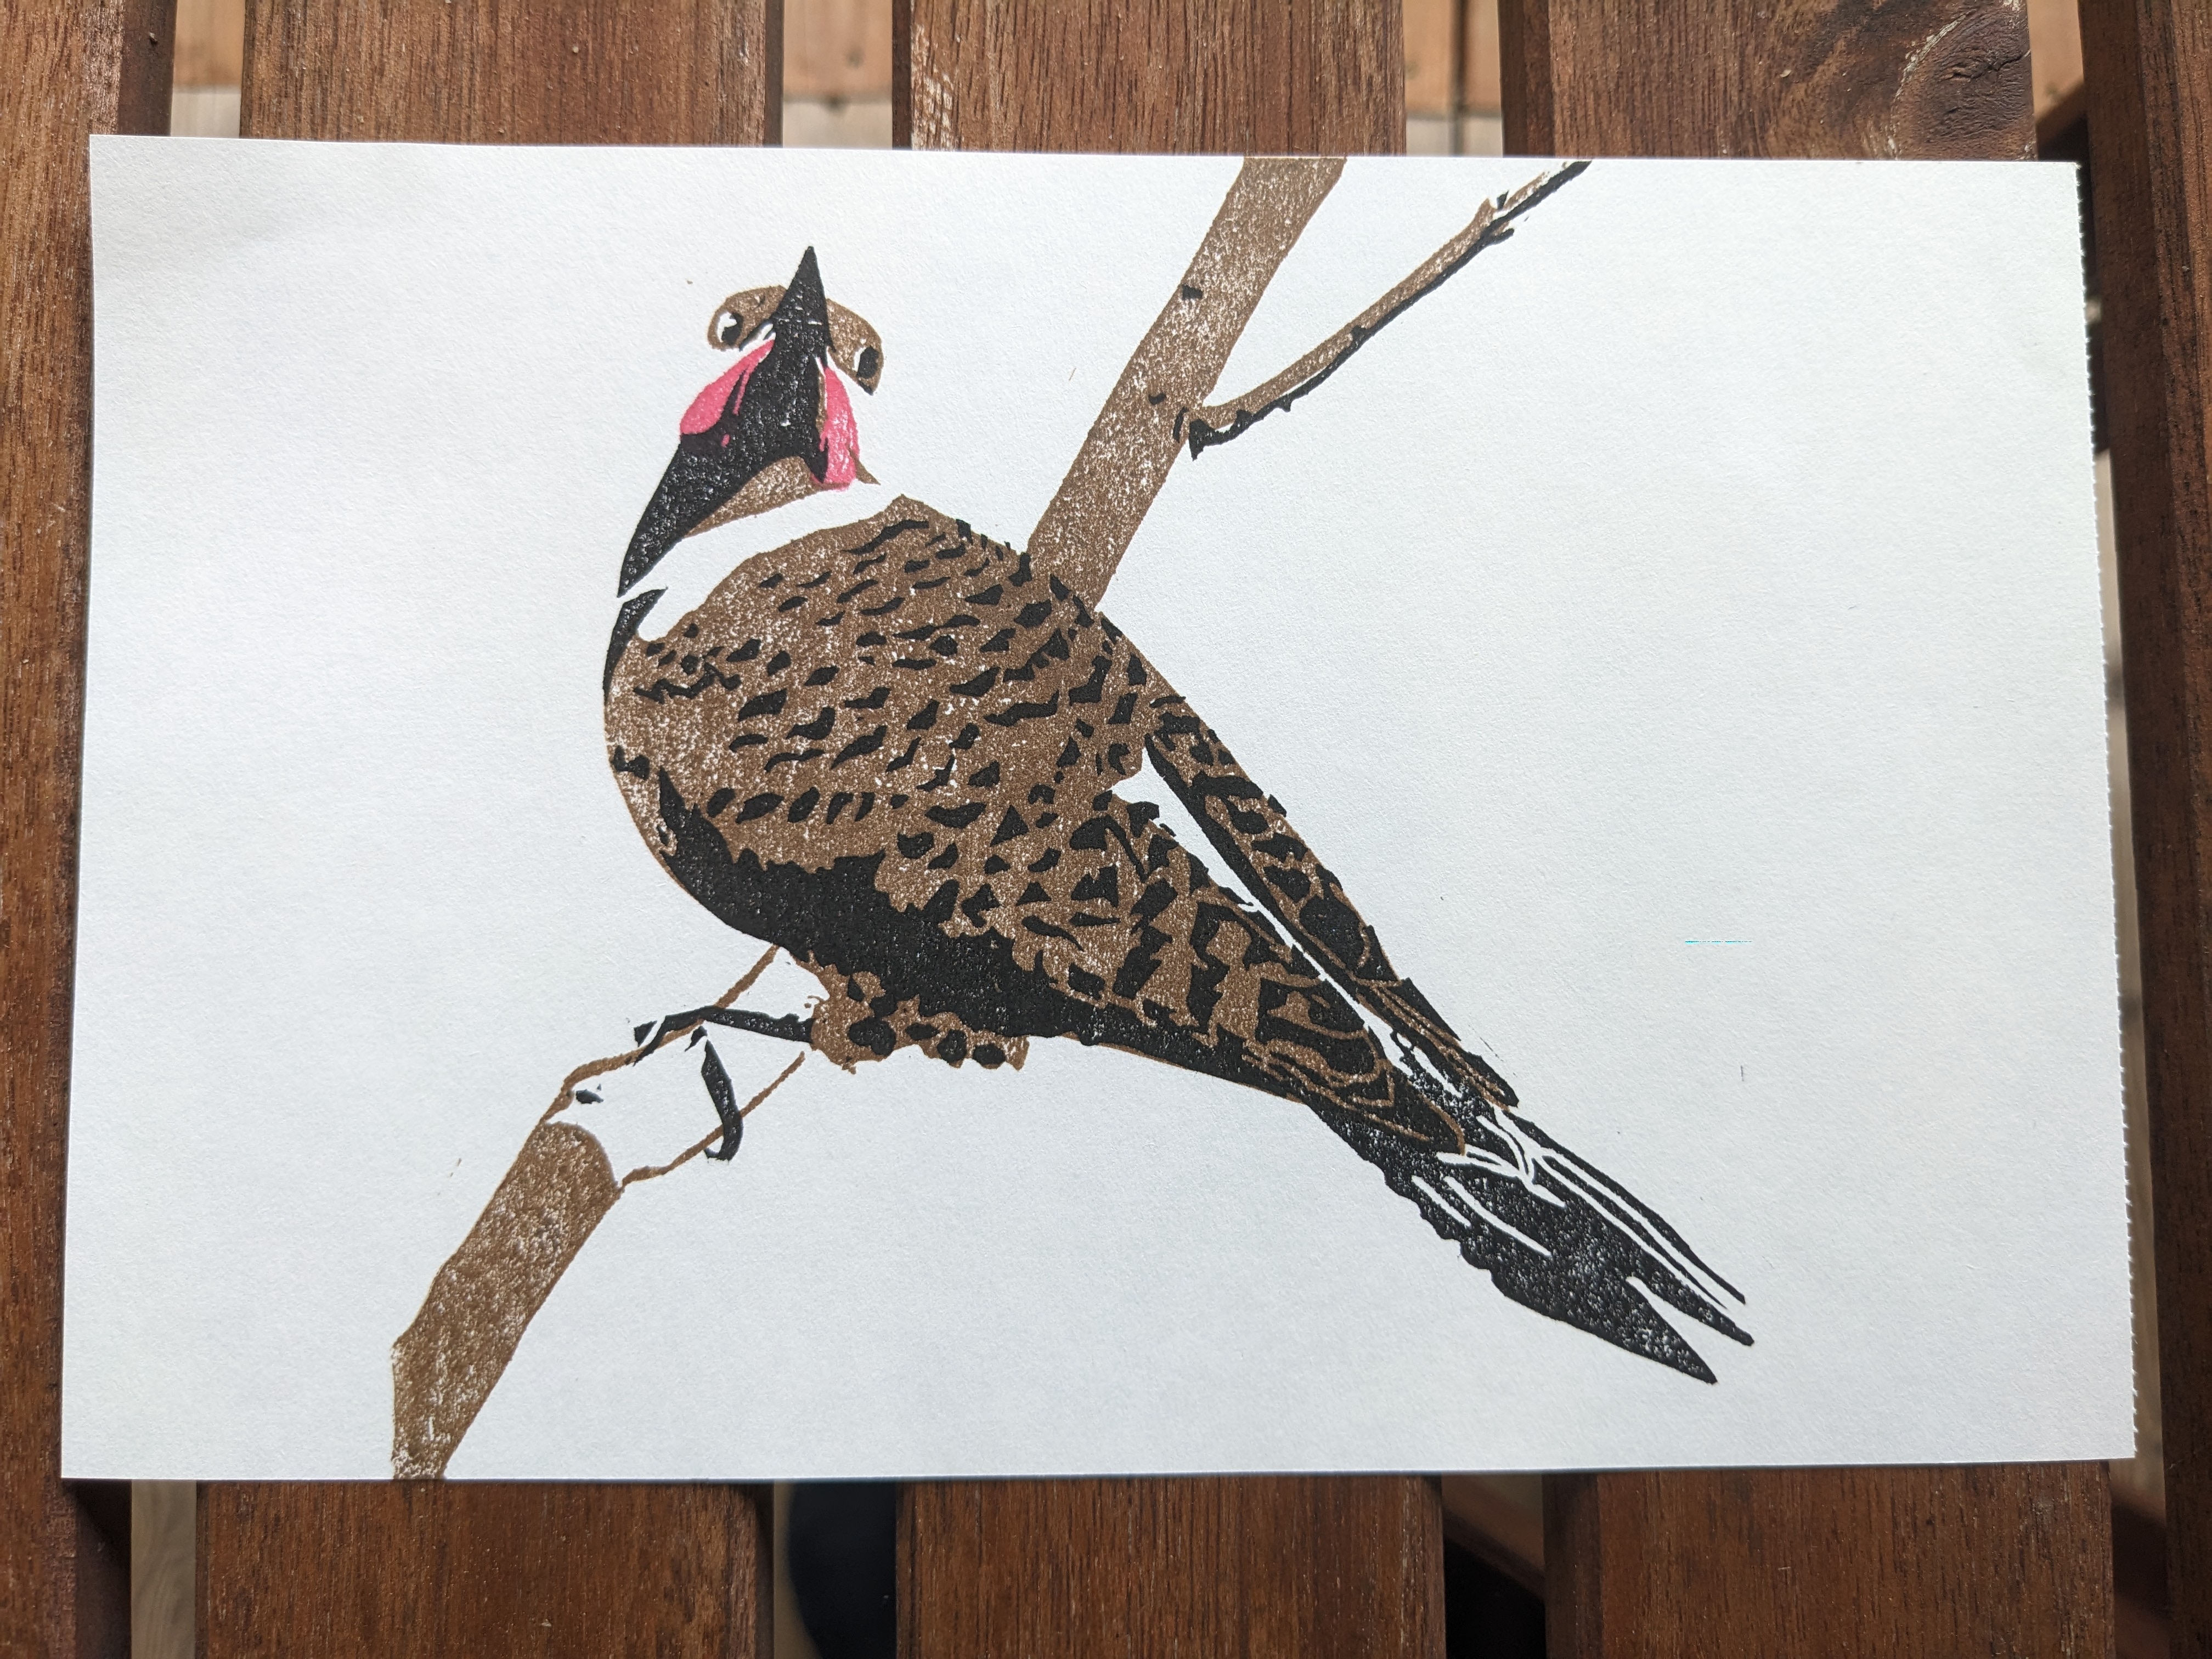 A print in black, brown, and red ink of a northern flicker (a type of woodpecker). Viewed from the back, he is looking over his shoulder and upward towards something unseen above him (my bird feeder).